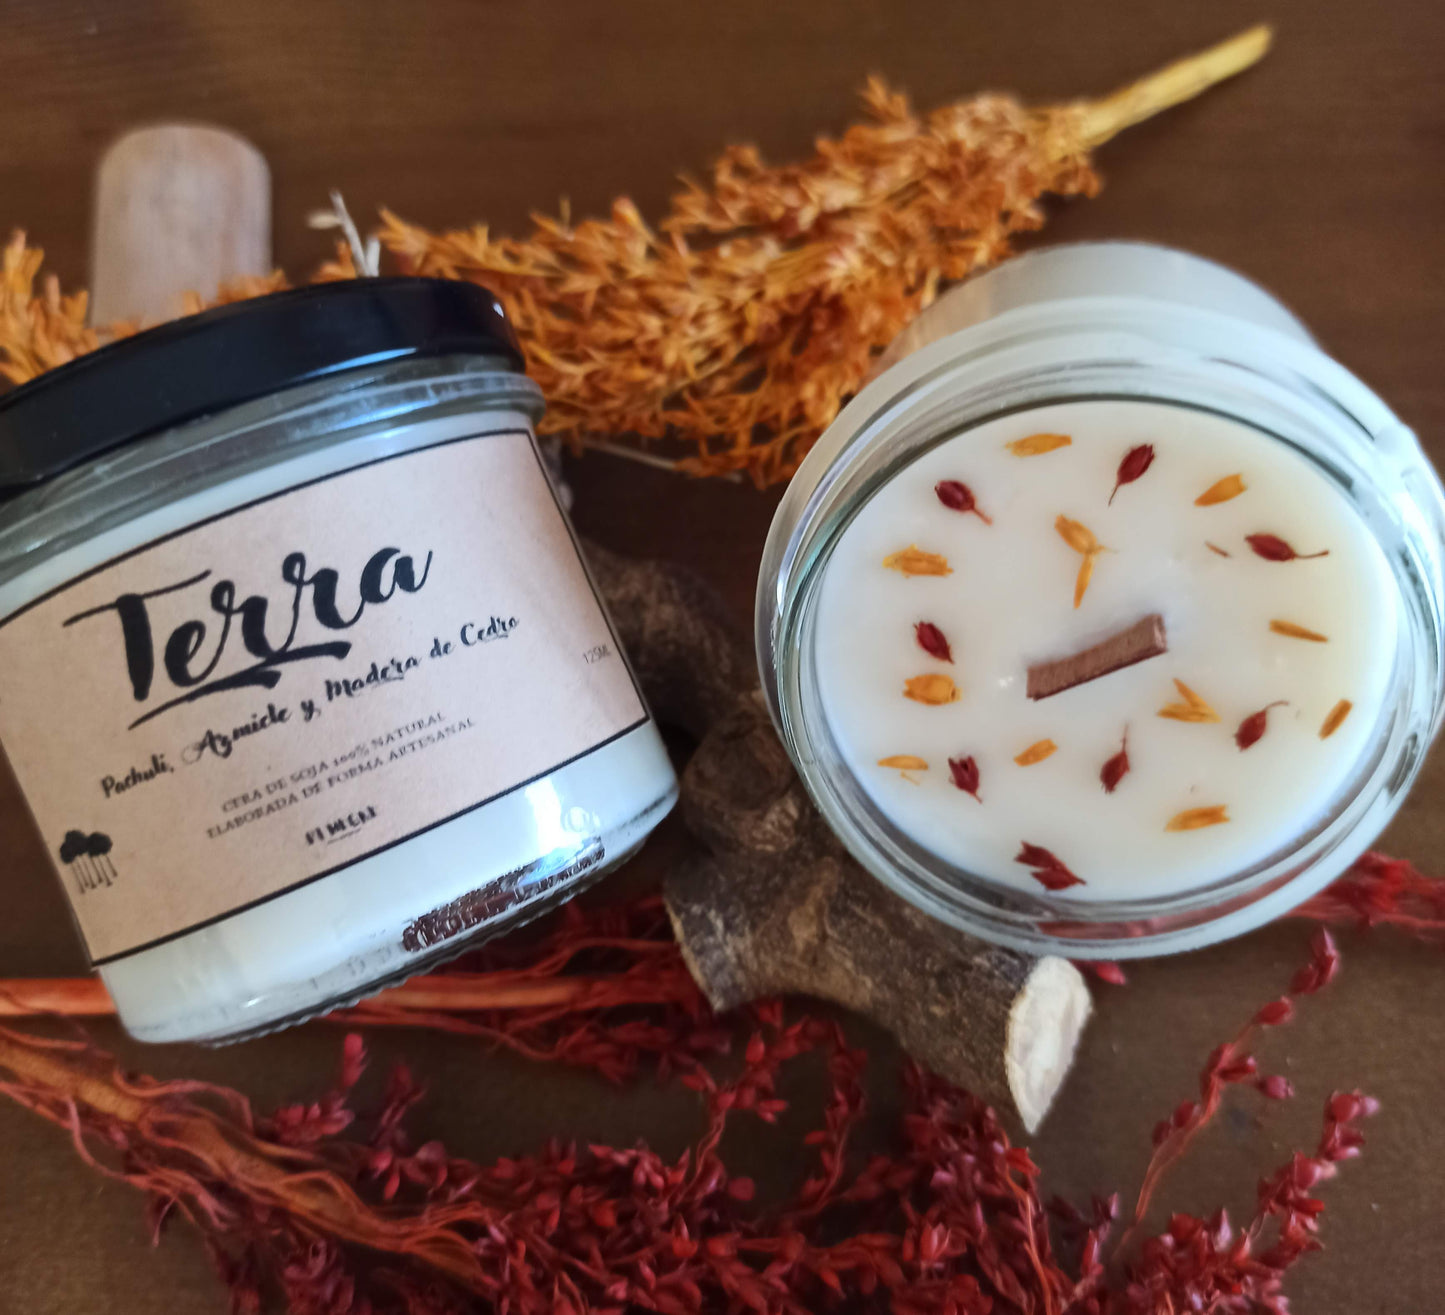 TERRA Candle